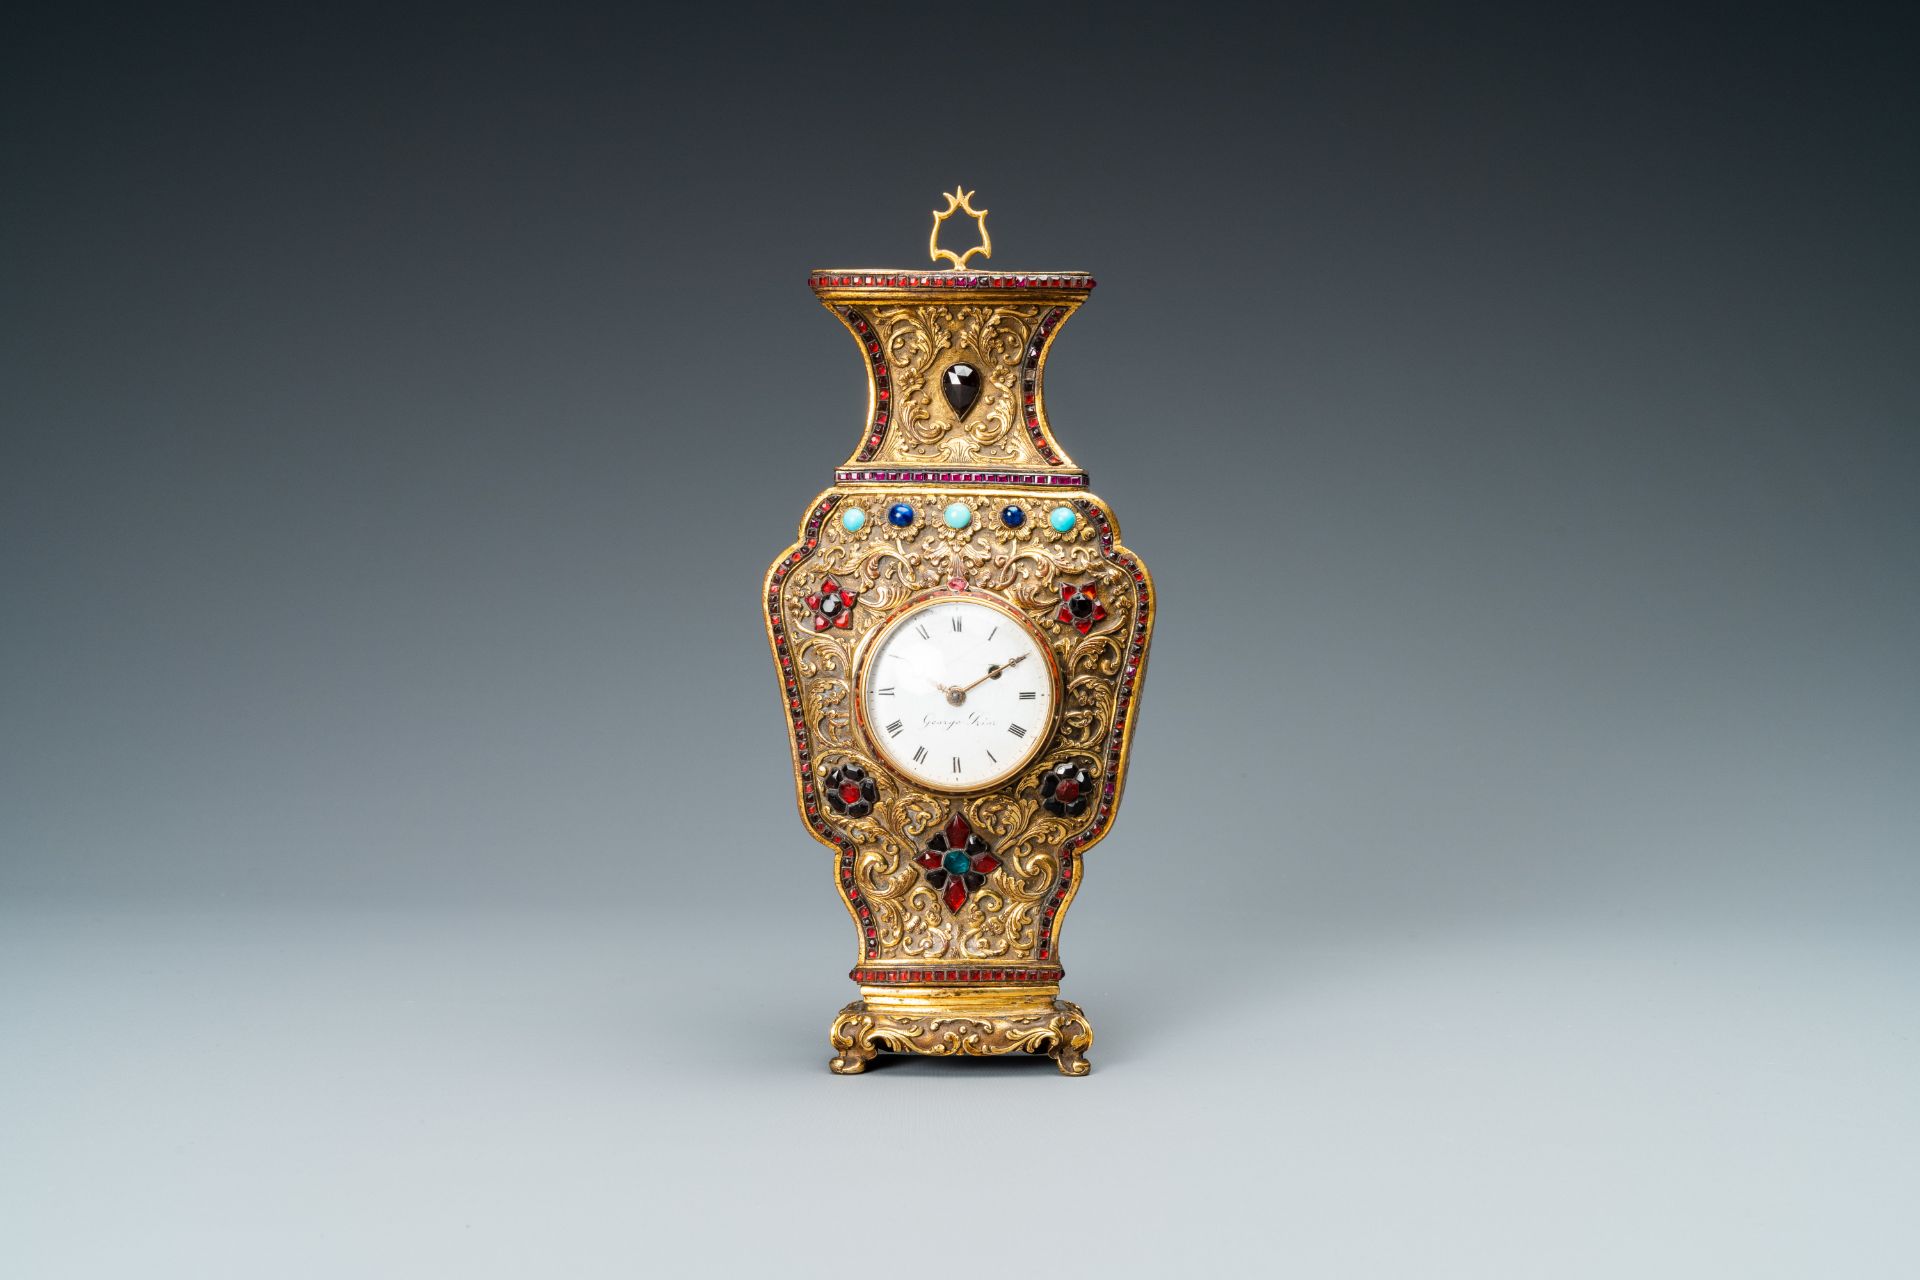 A Chinese semi-precious stone embellished gilt-bronze clock, Canton & Prior of London, Qianlong